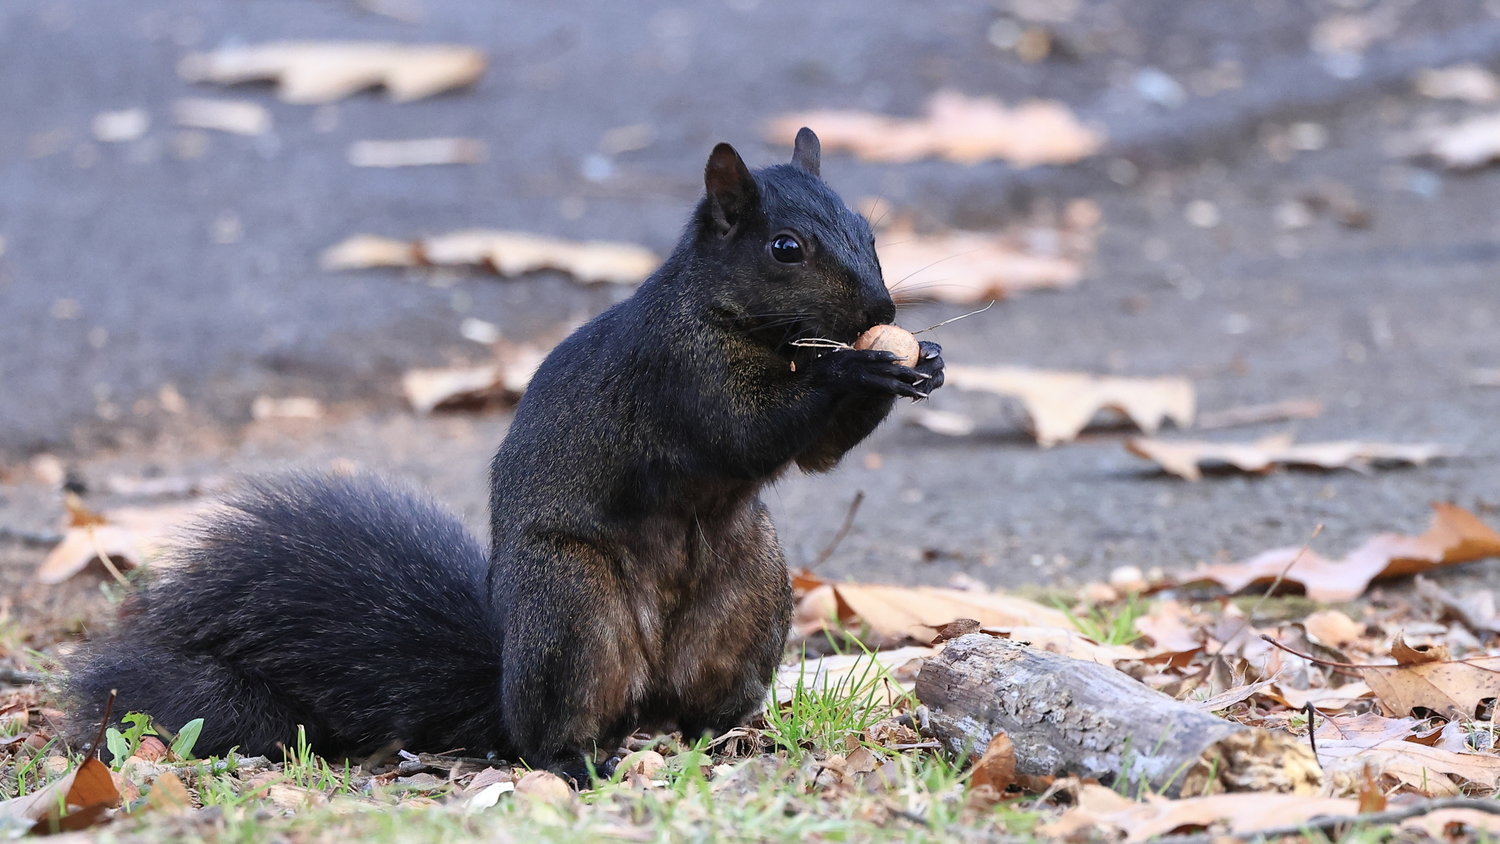 A melanistic black squirrel photographed on the River Flat Trail, Narrowsburg, NY.